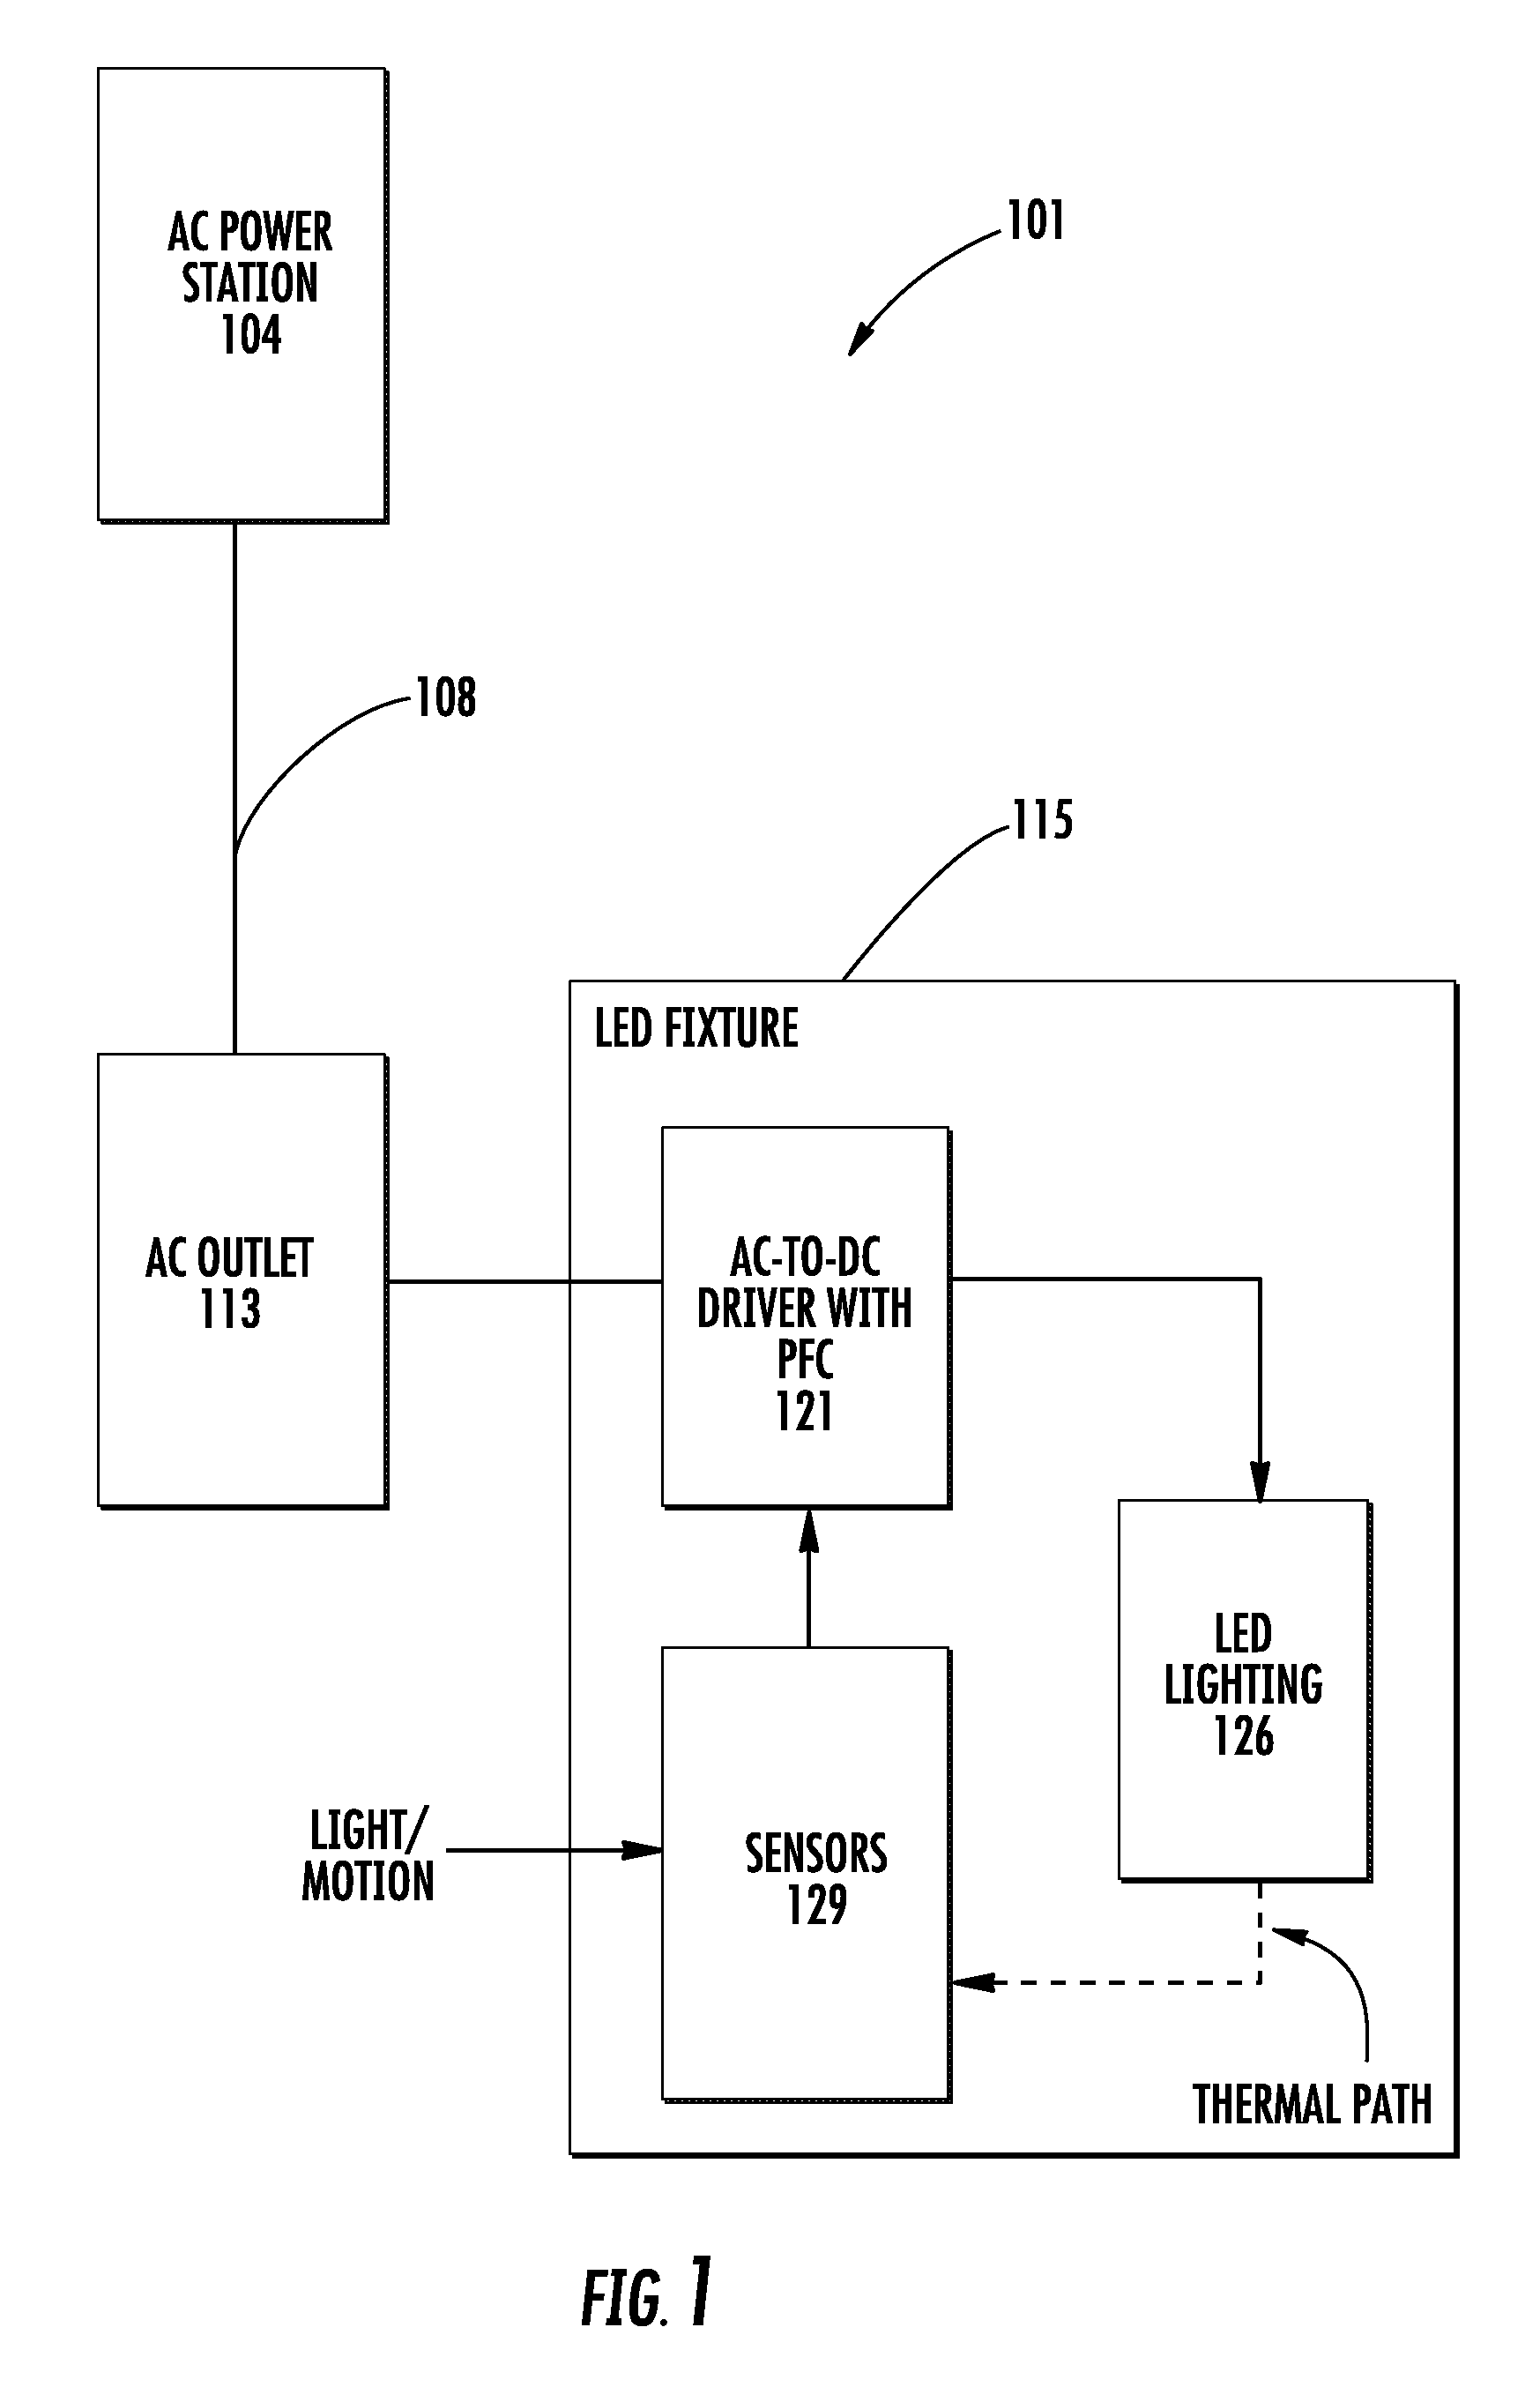 Valley-fill power factor correction circuit with active conduction angle control